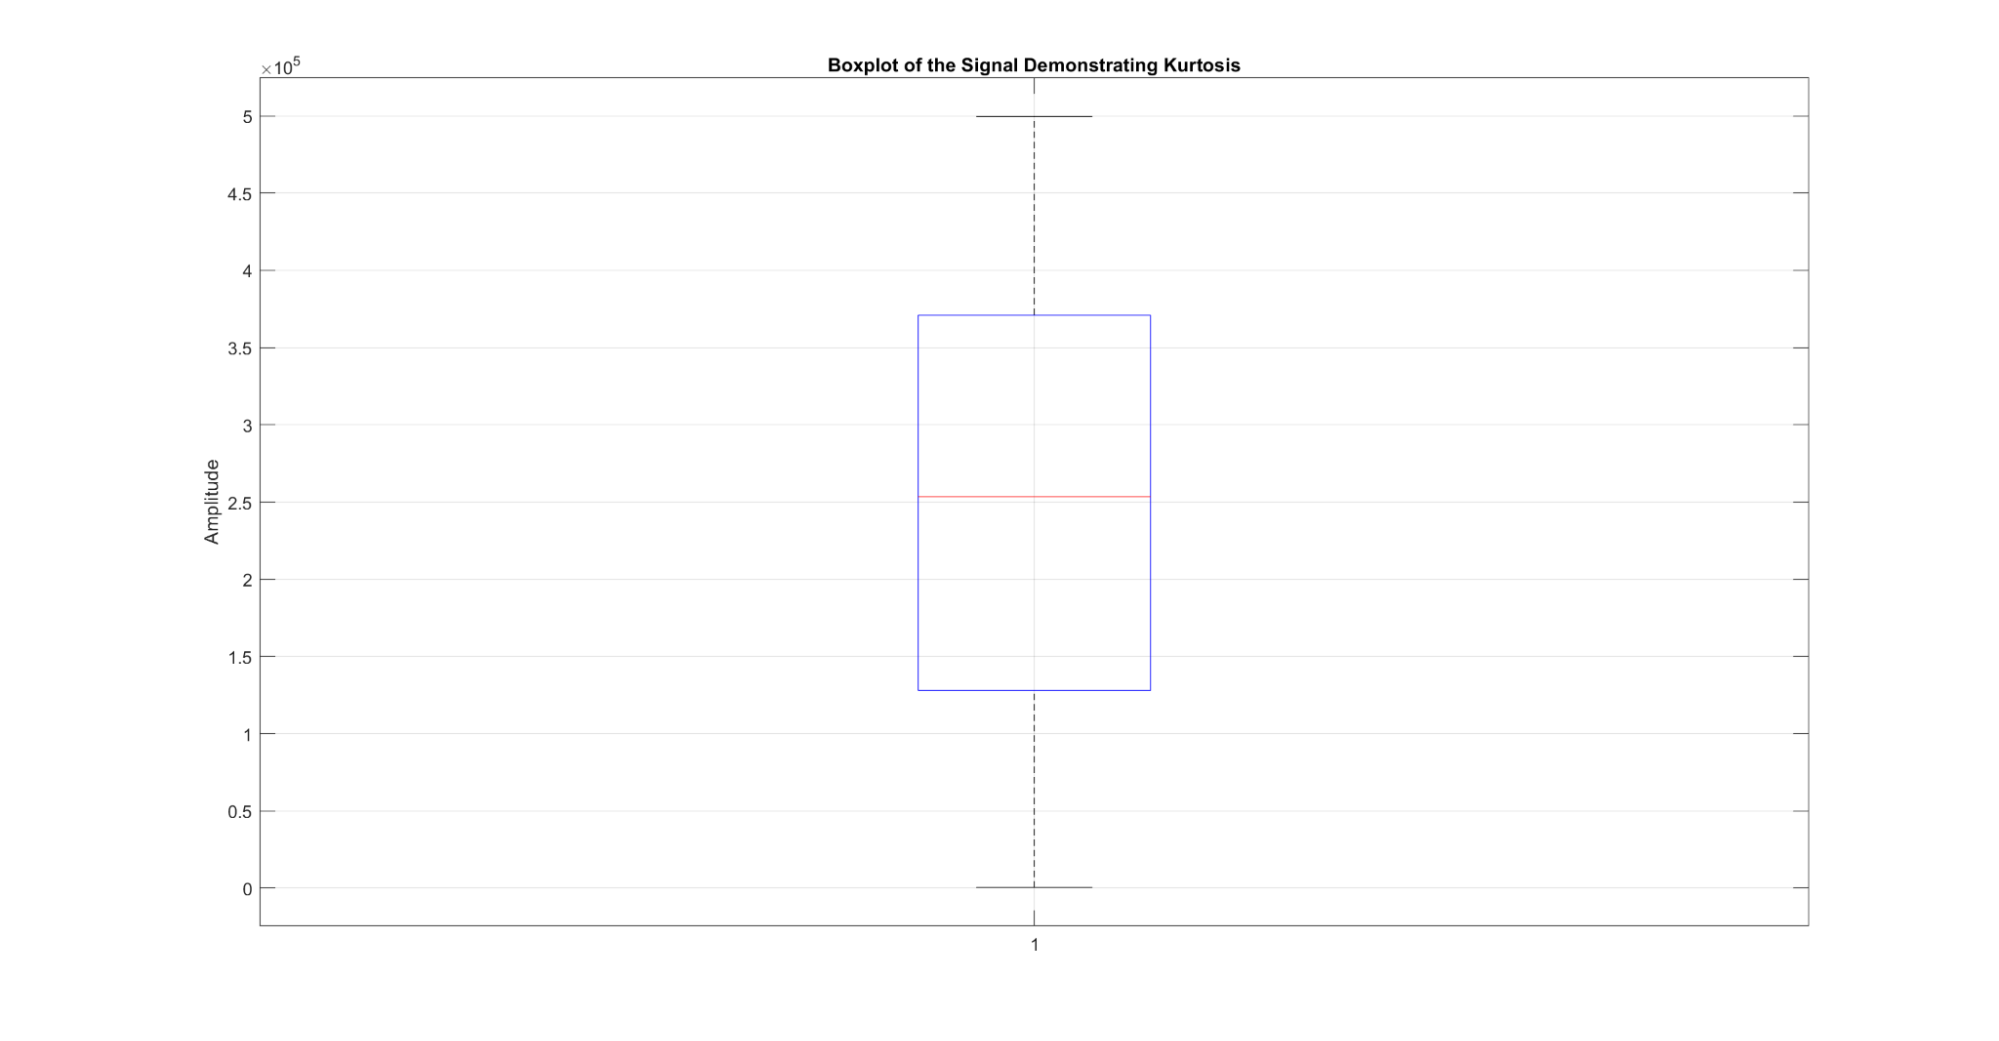 Figure 13: A demonstration of the kurtosis metric for a signal. When the signal is plotted as a boxplot of amplitudes, the kurtosis can be visualized by the height of the box.